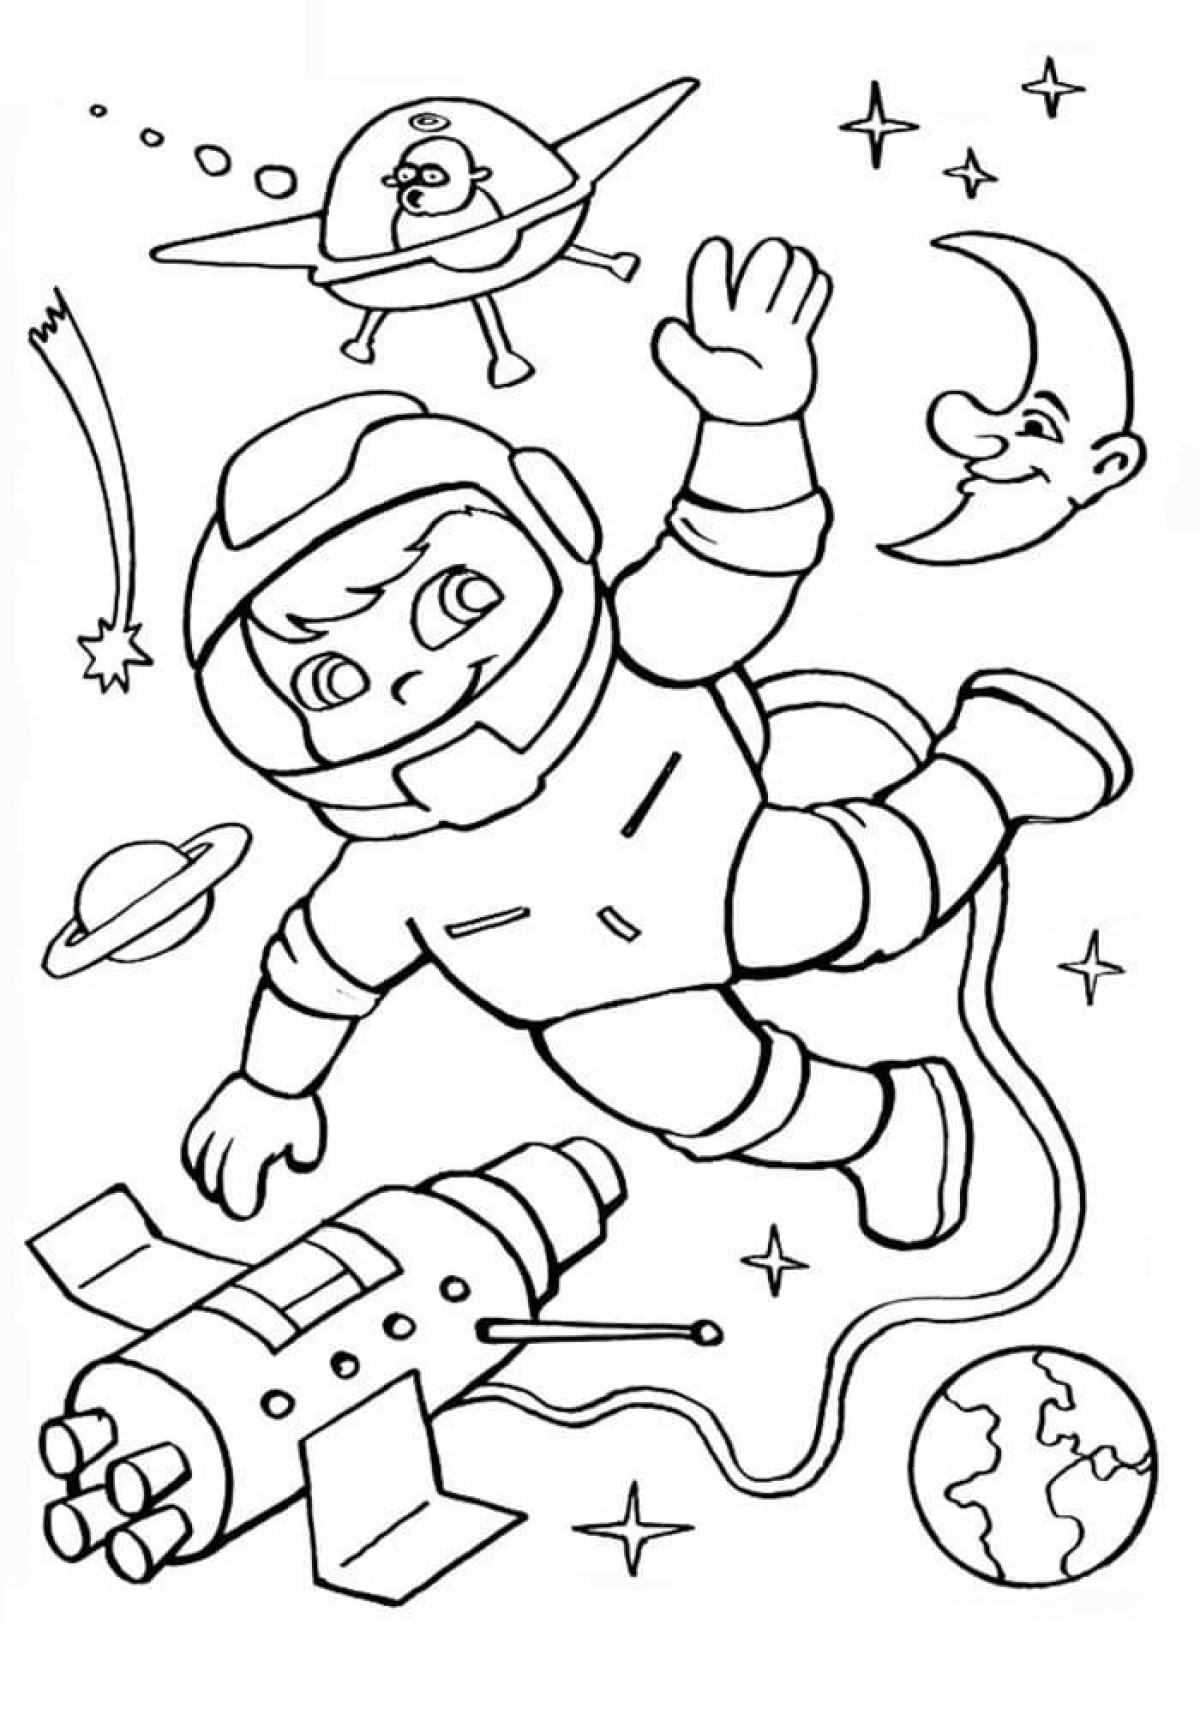 Magic space coloring book for kids